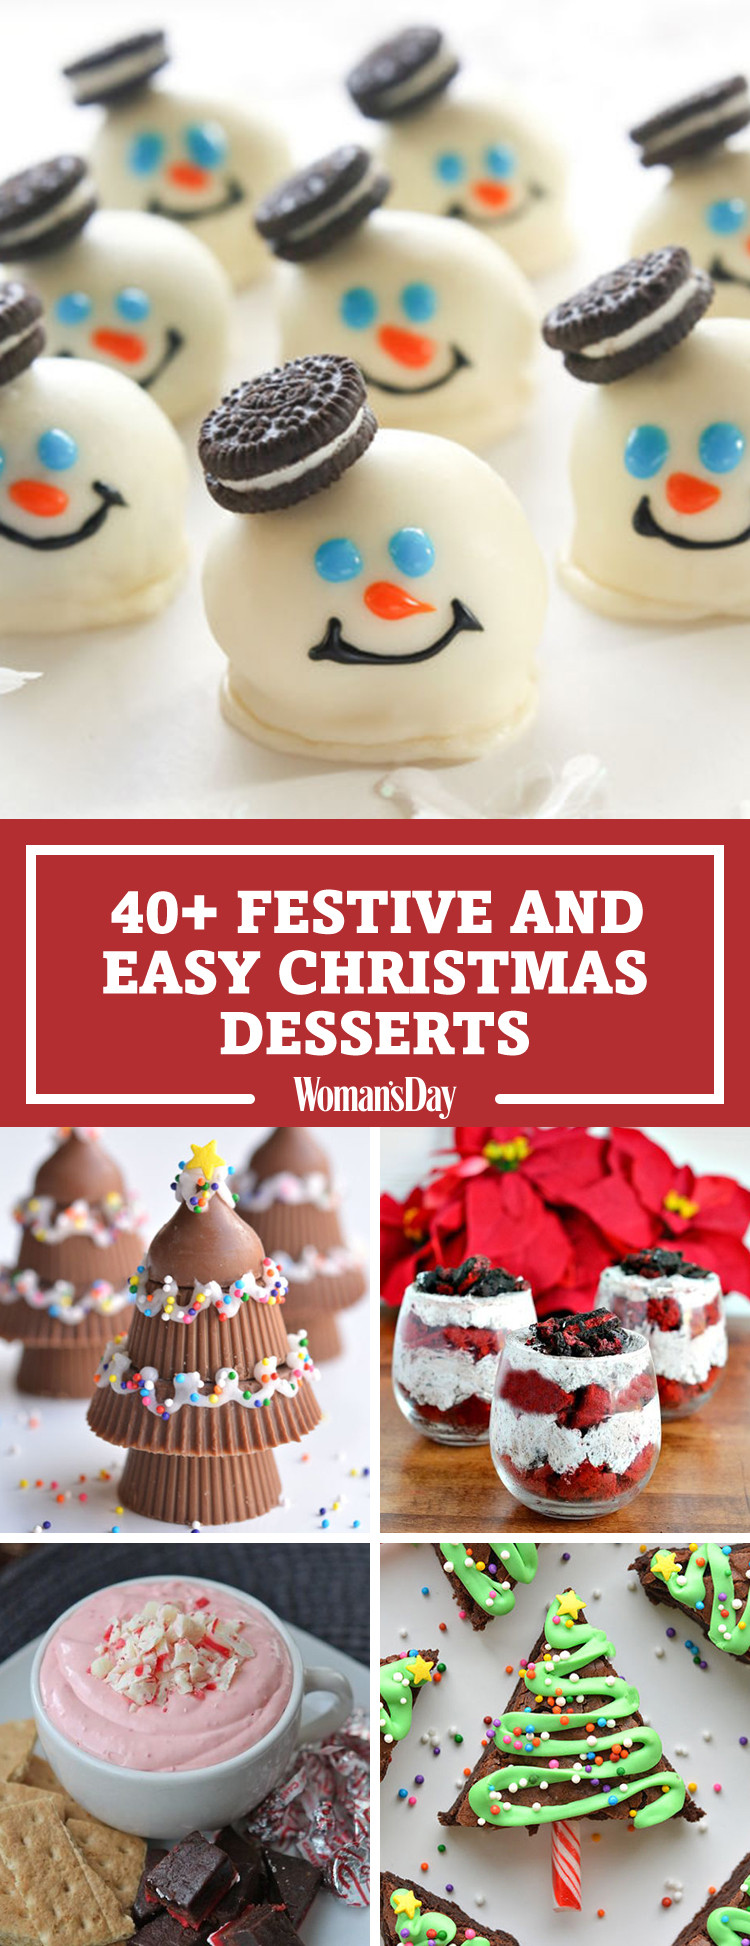 Simple Holiday Desserts
 57 Easy Christmas Dessert Recipes Best Ideas for Fun